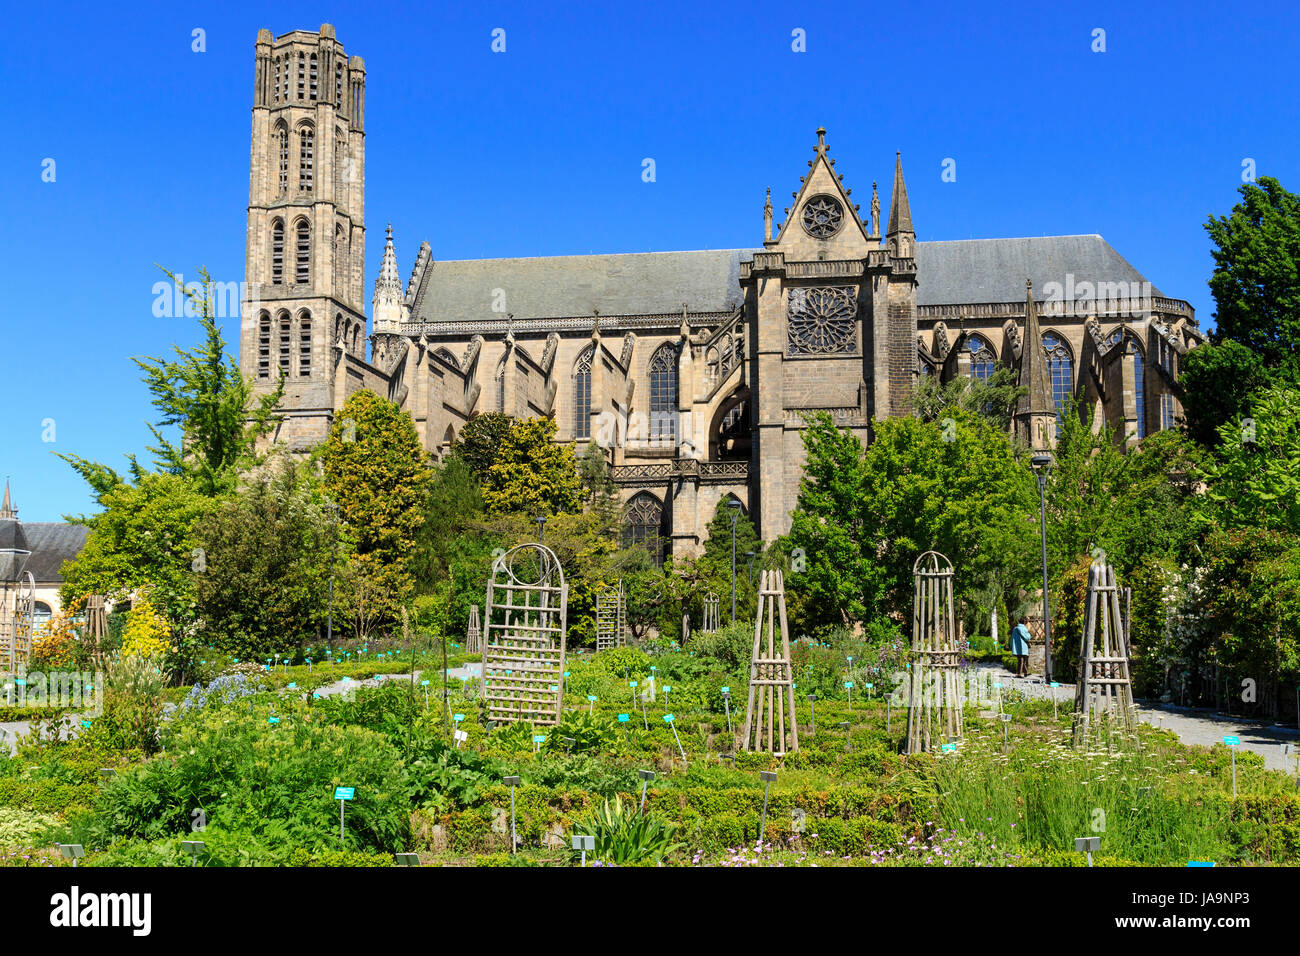 France, Haute Vienne, Limoges, the Jardin botanique de l'Eveche (Botanical Garden of the Bishopric) and the Saint Etienne cathedrale Stock Photo